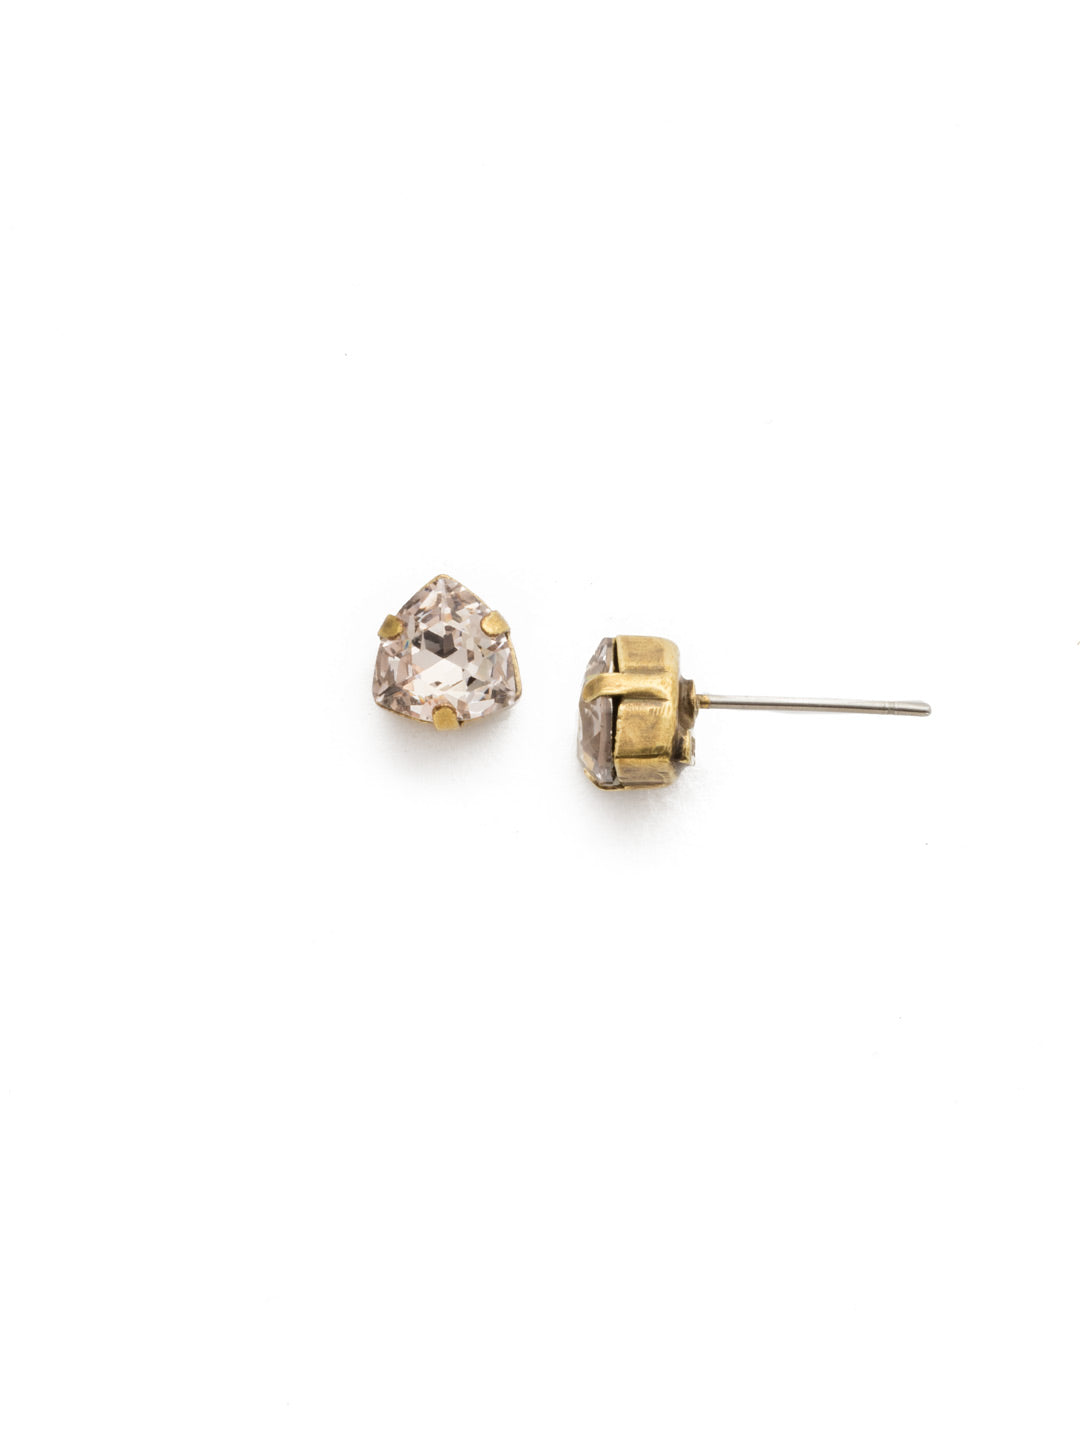 Sedge Stud Earrings - EDX1AGSTN - <p>A shield shaped crystal in a simple pronged setting. Perfect if you want to add just a bit of sparkle to any outfit! From Sorrelli's Sandstone collection in our Antique Gold-tone finish.</p>